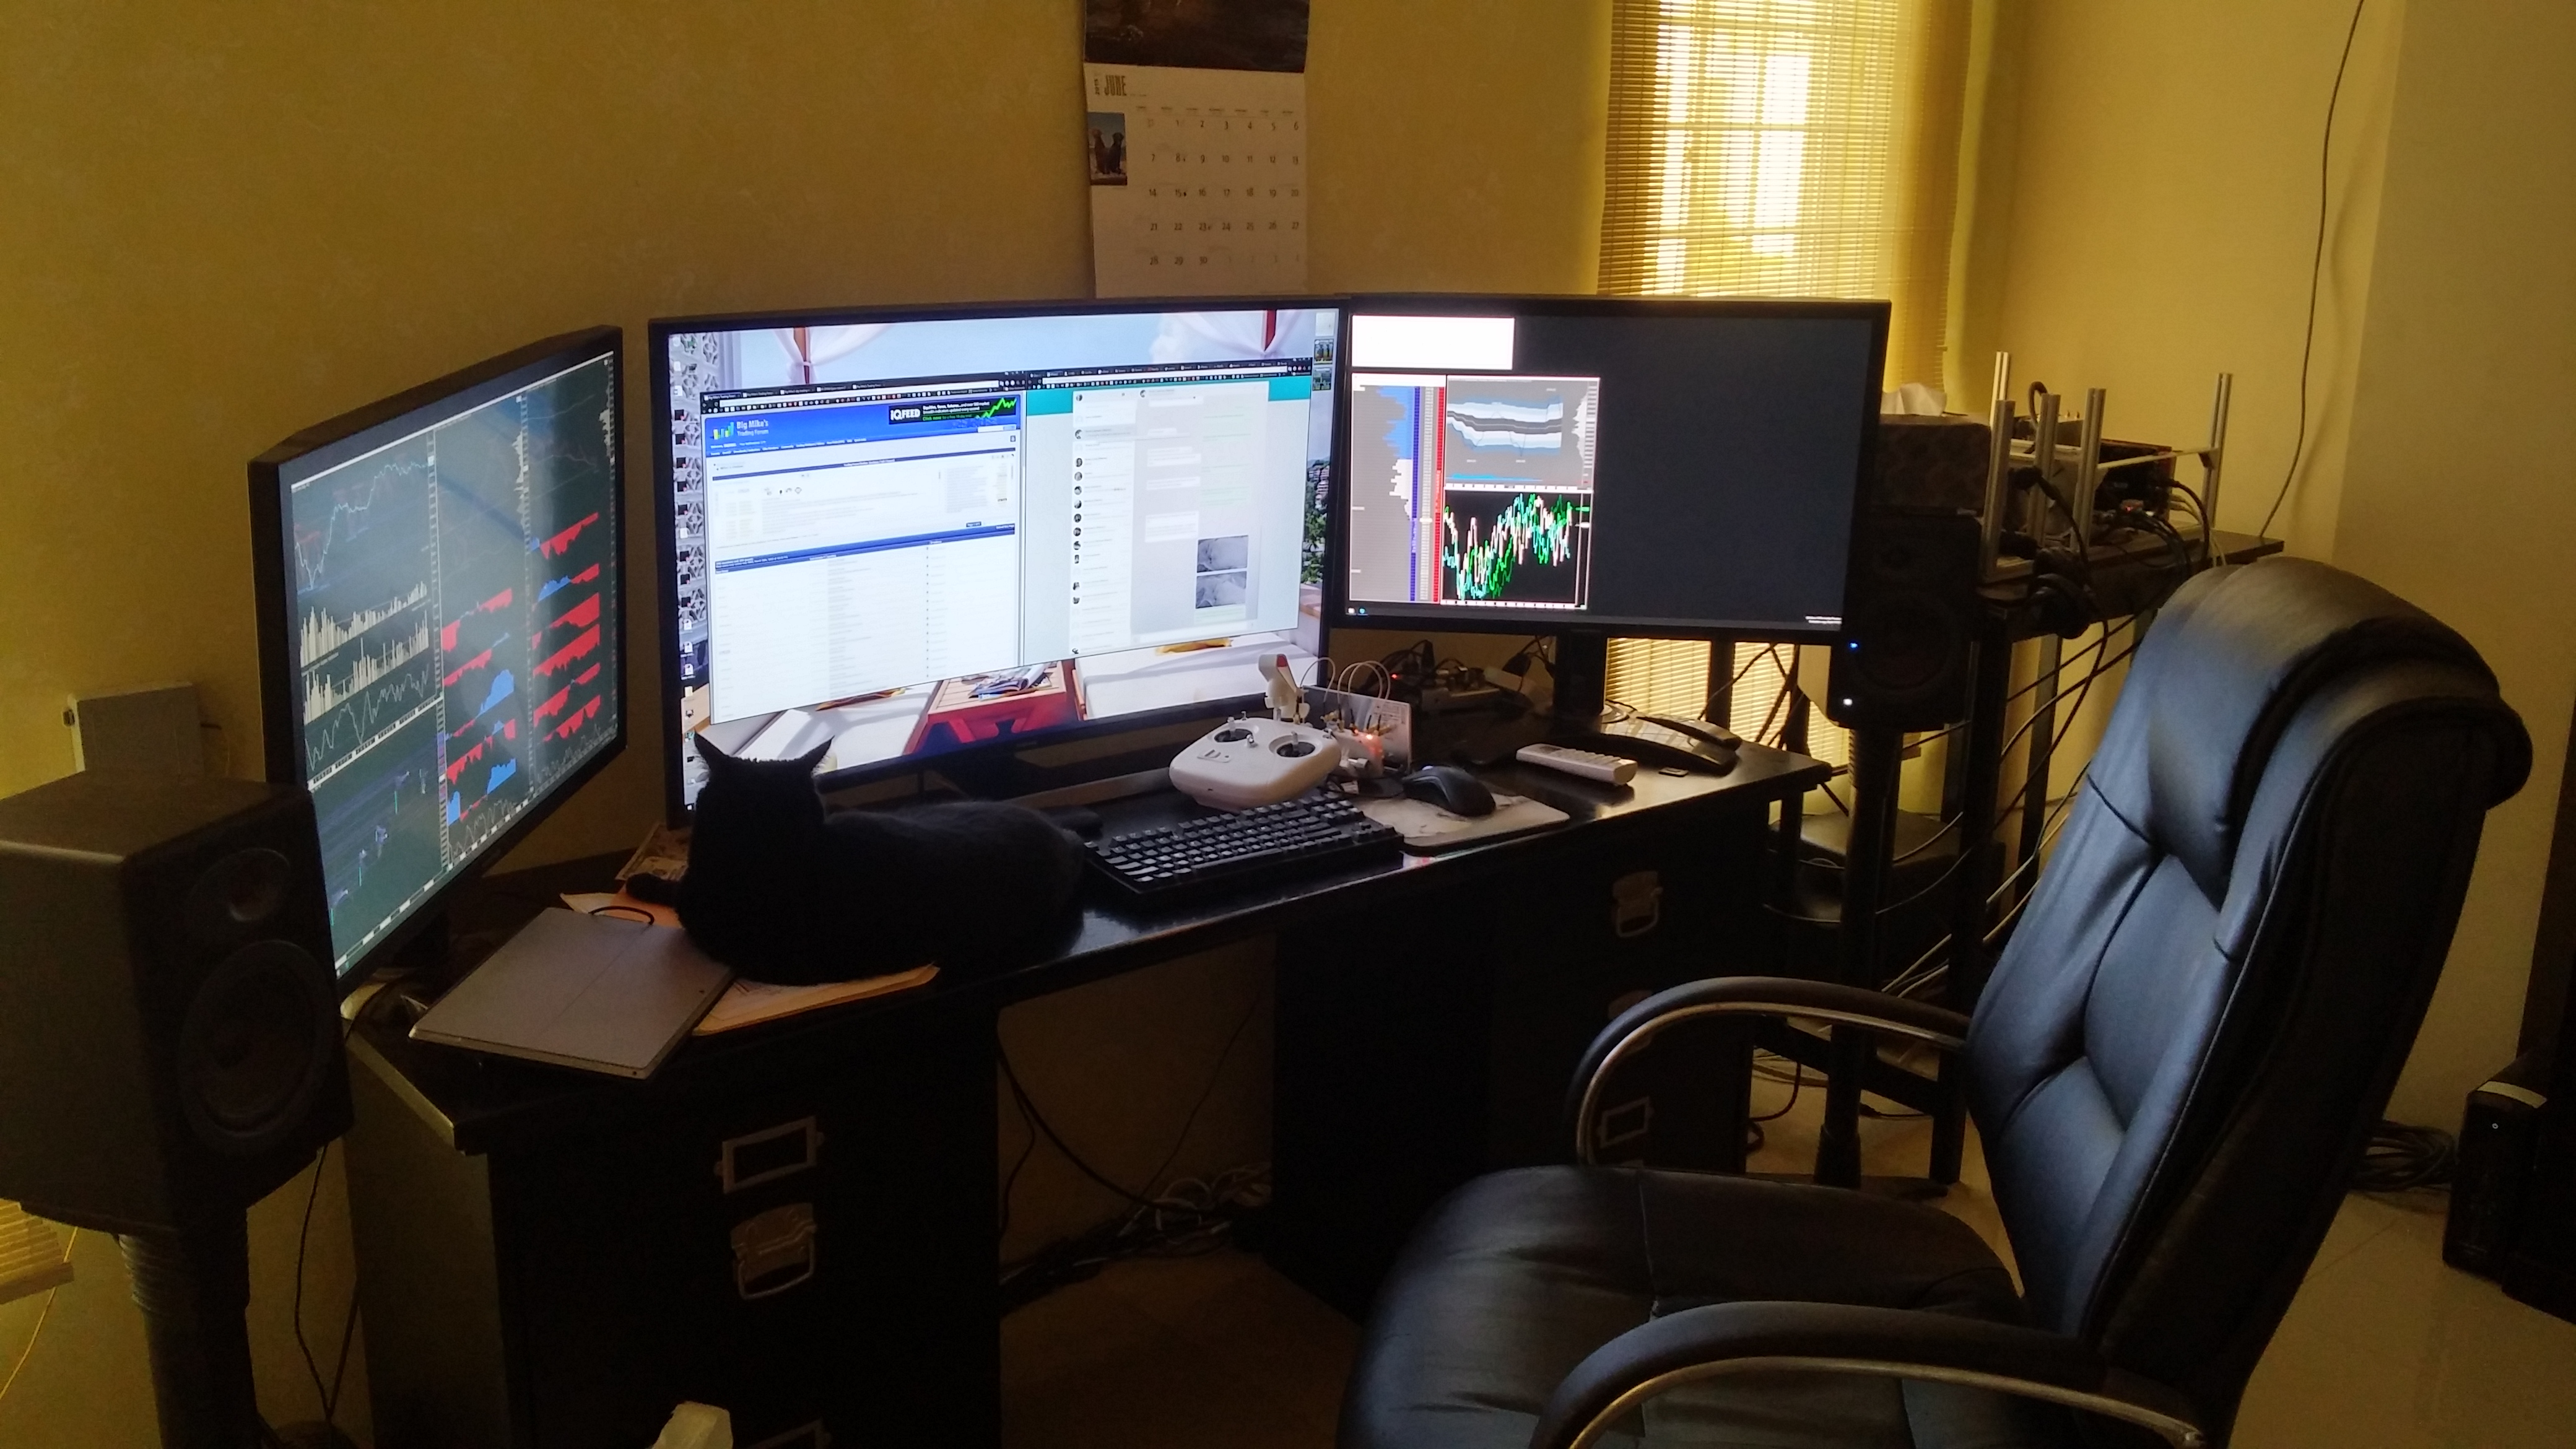 Curved Monitors in trading like Dell U3415W, LG 34UM95-P ...